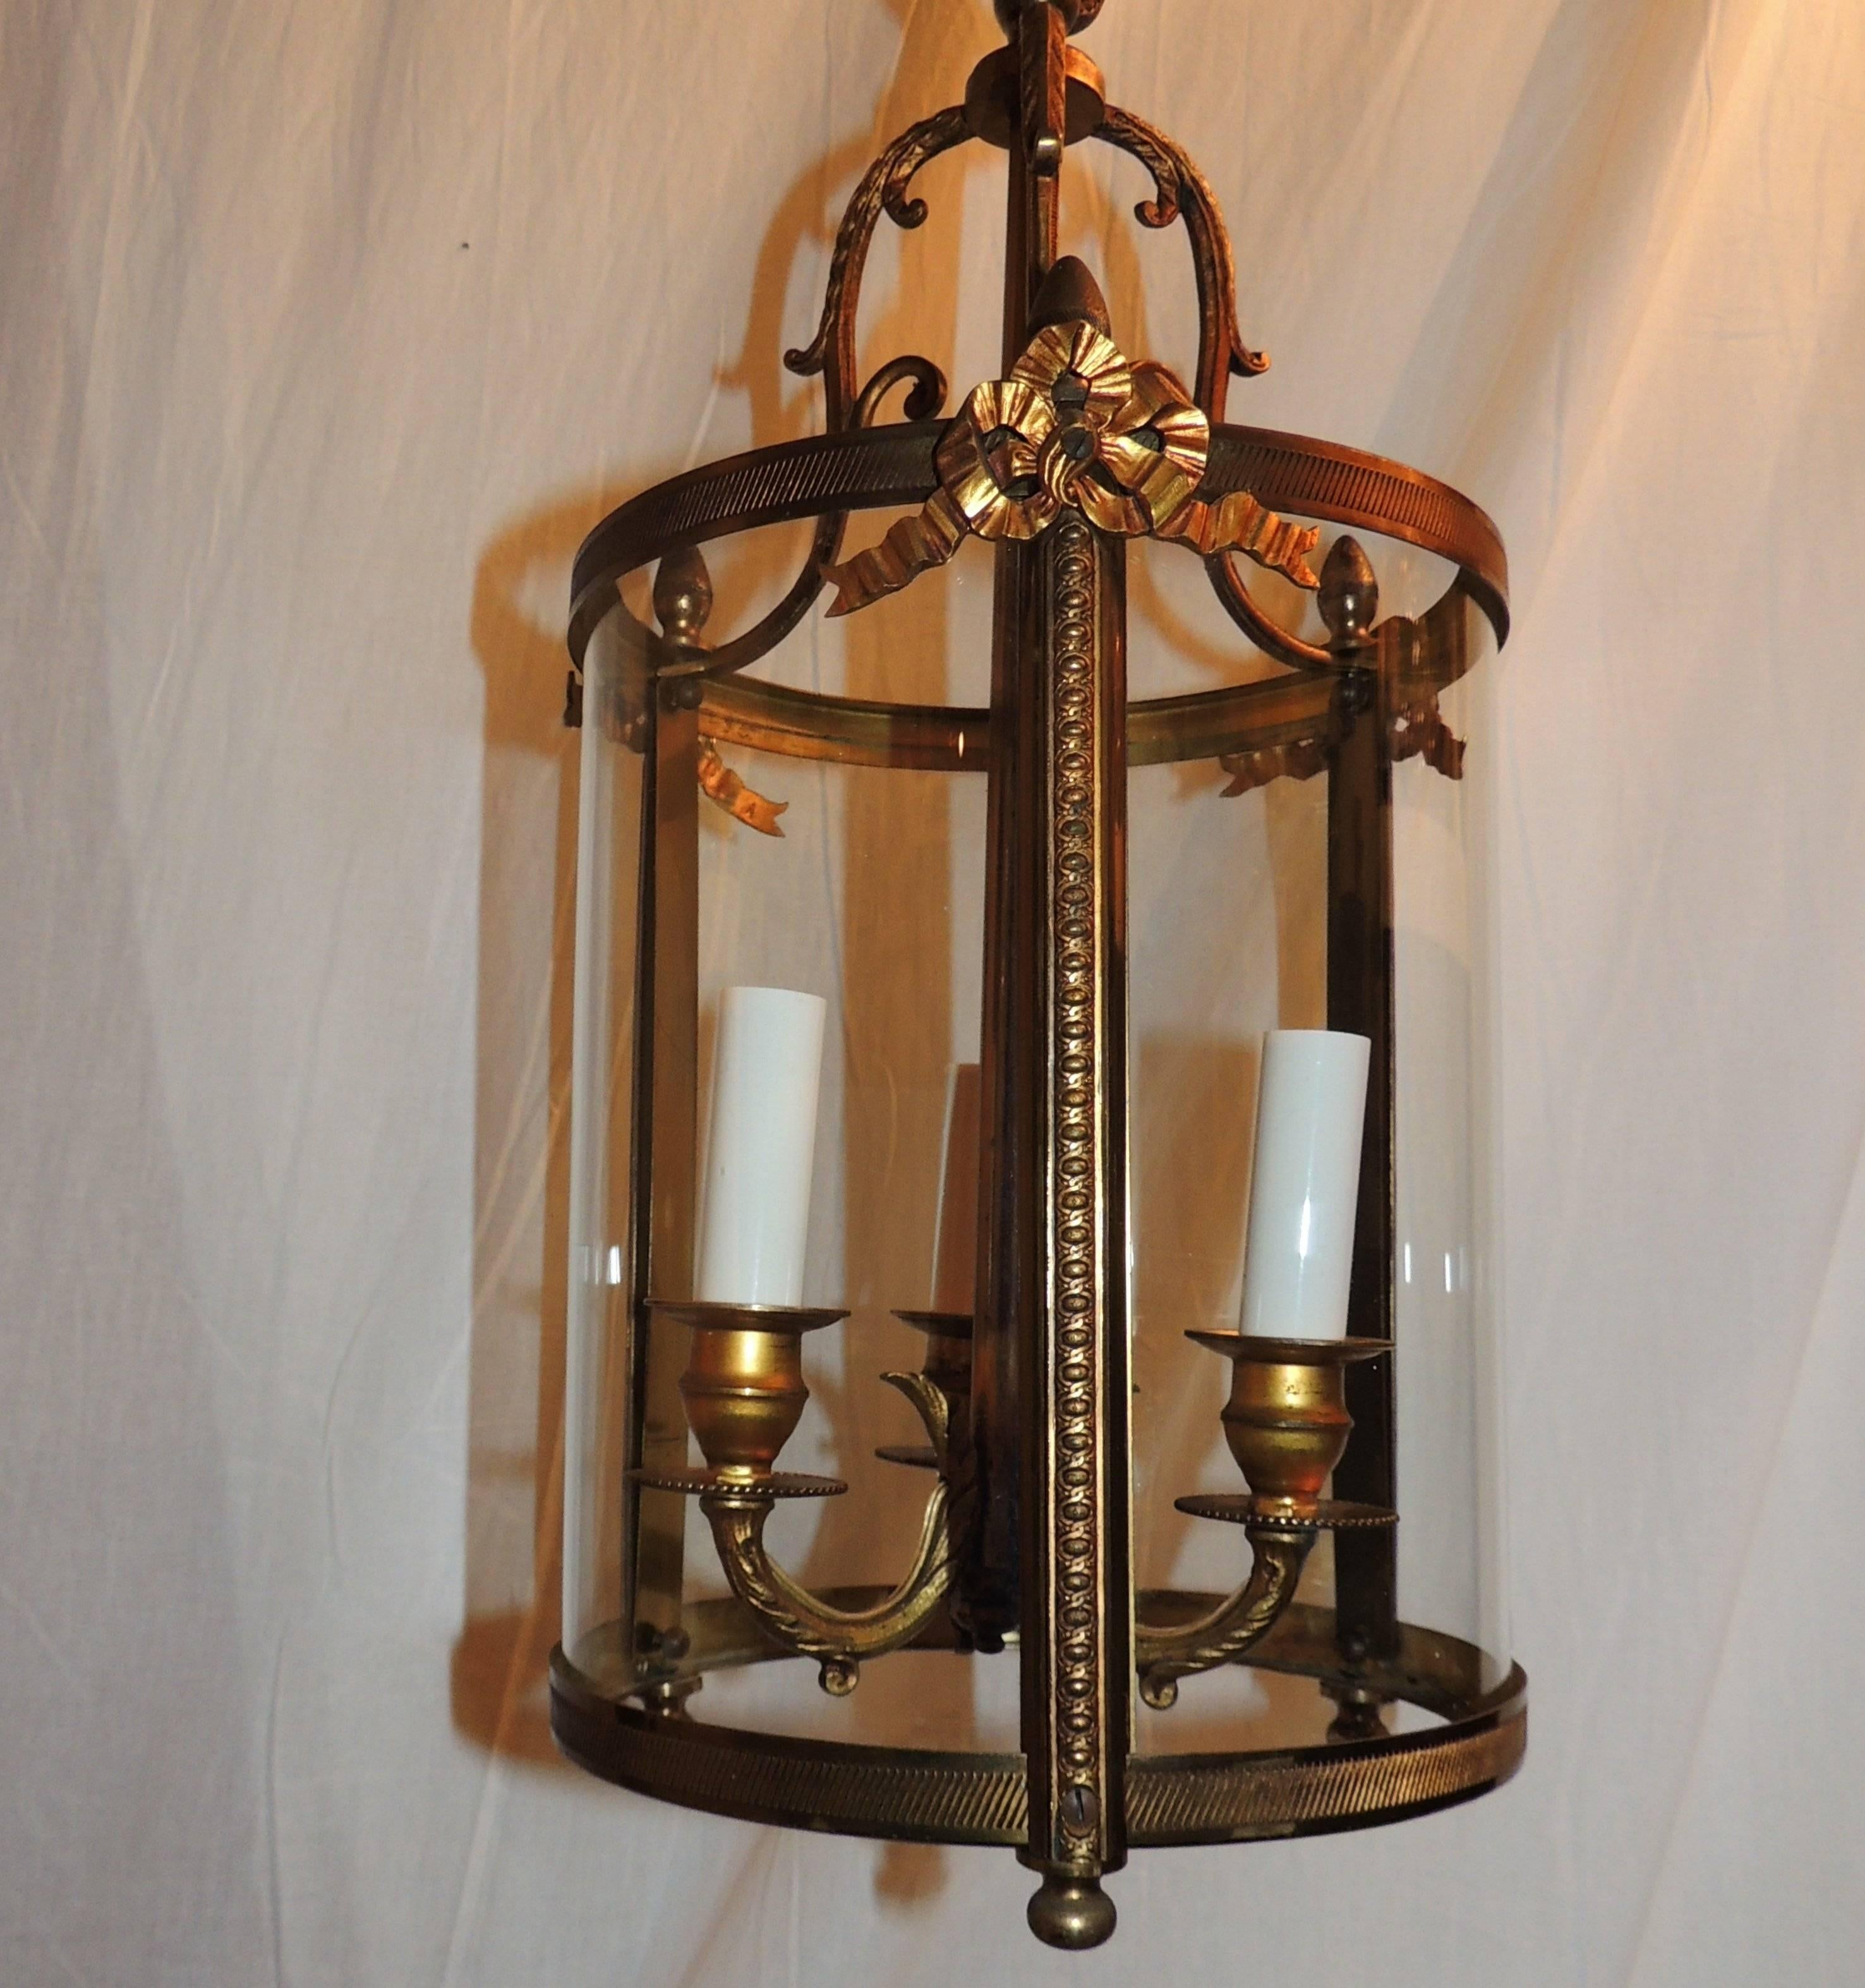 A wonderful petite lantern with curved glass sides and beautiful etched detail from the ribbon bows that accent the top to the filigree decorated arms of the three lights.

Measures: 9